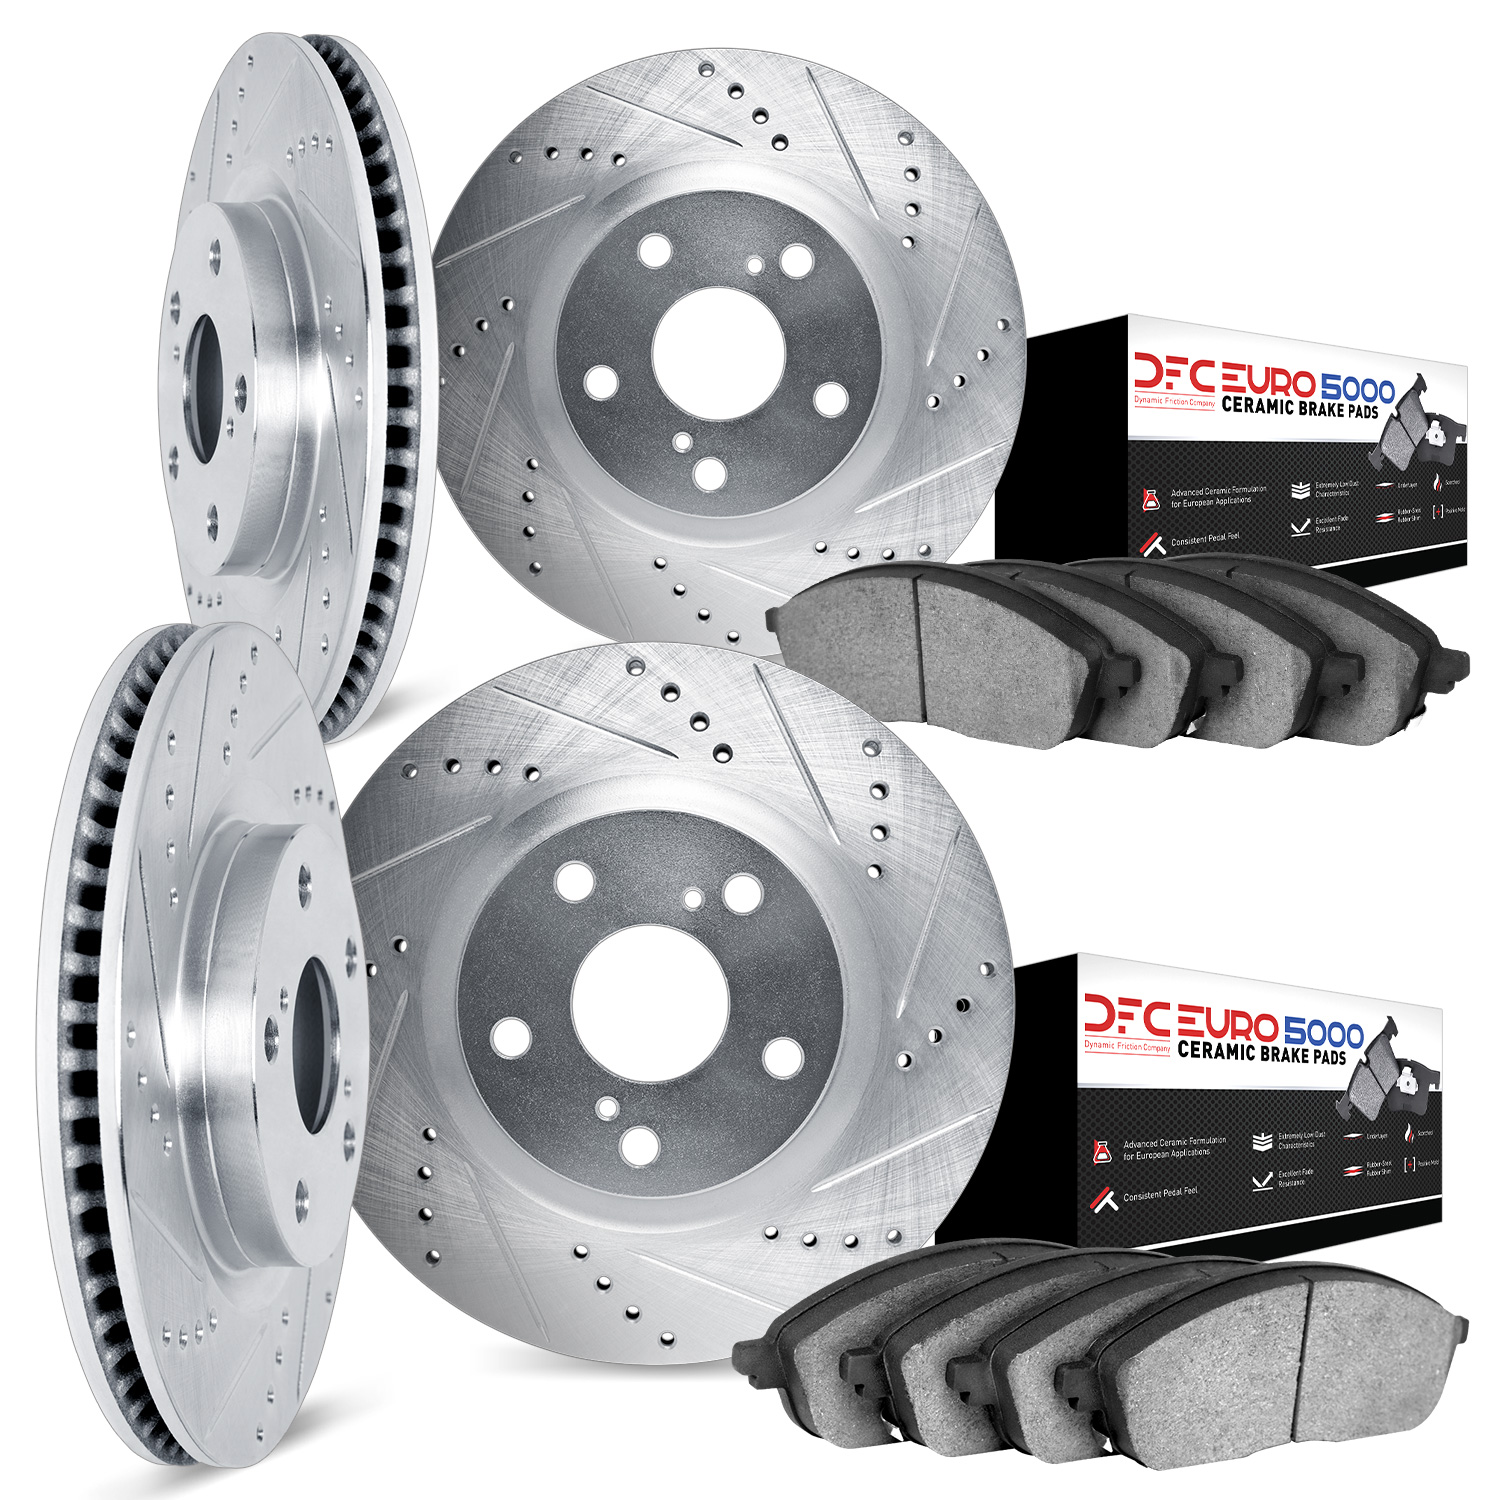 7604-42000 Drilled/Slotted Brake Rotors w/5000 Euro Ceramic Brake Pads Kit [Silver], 2006-2010 Mopar, Position: Front and Rear